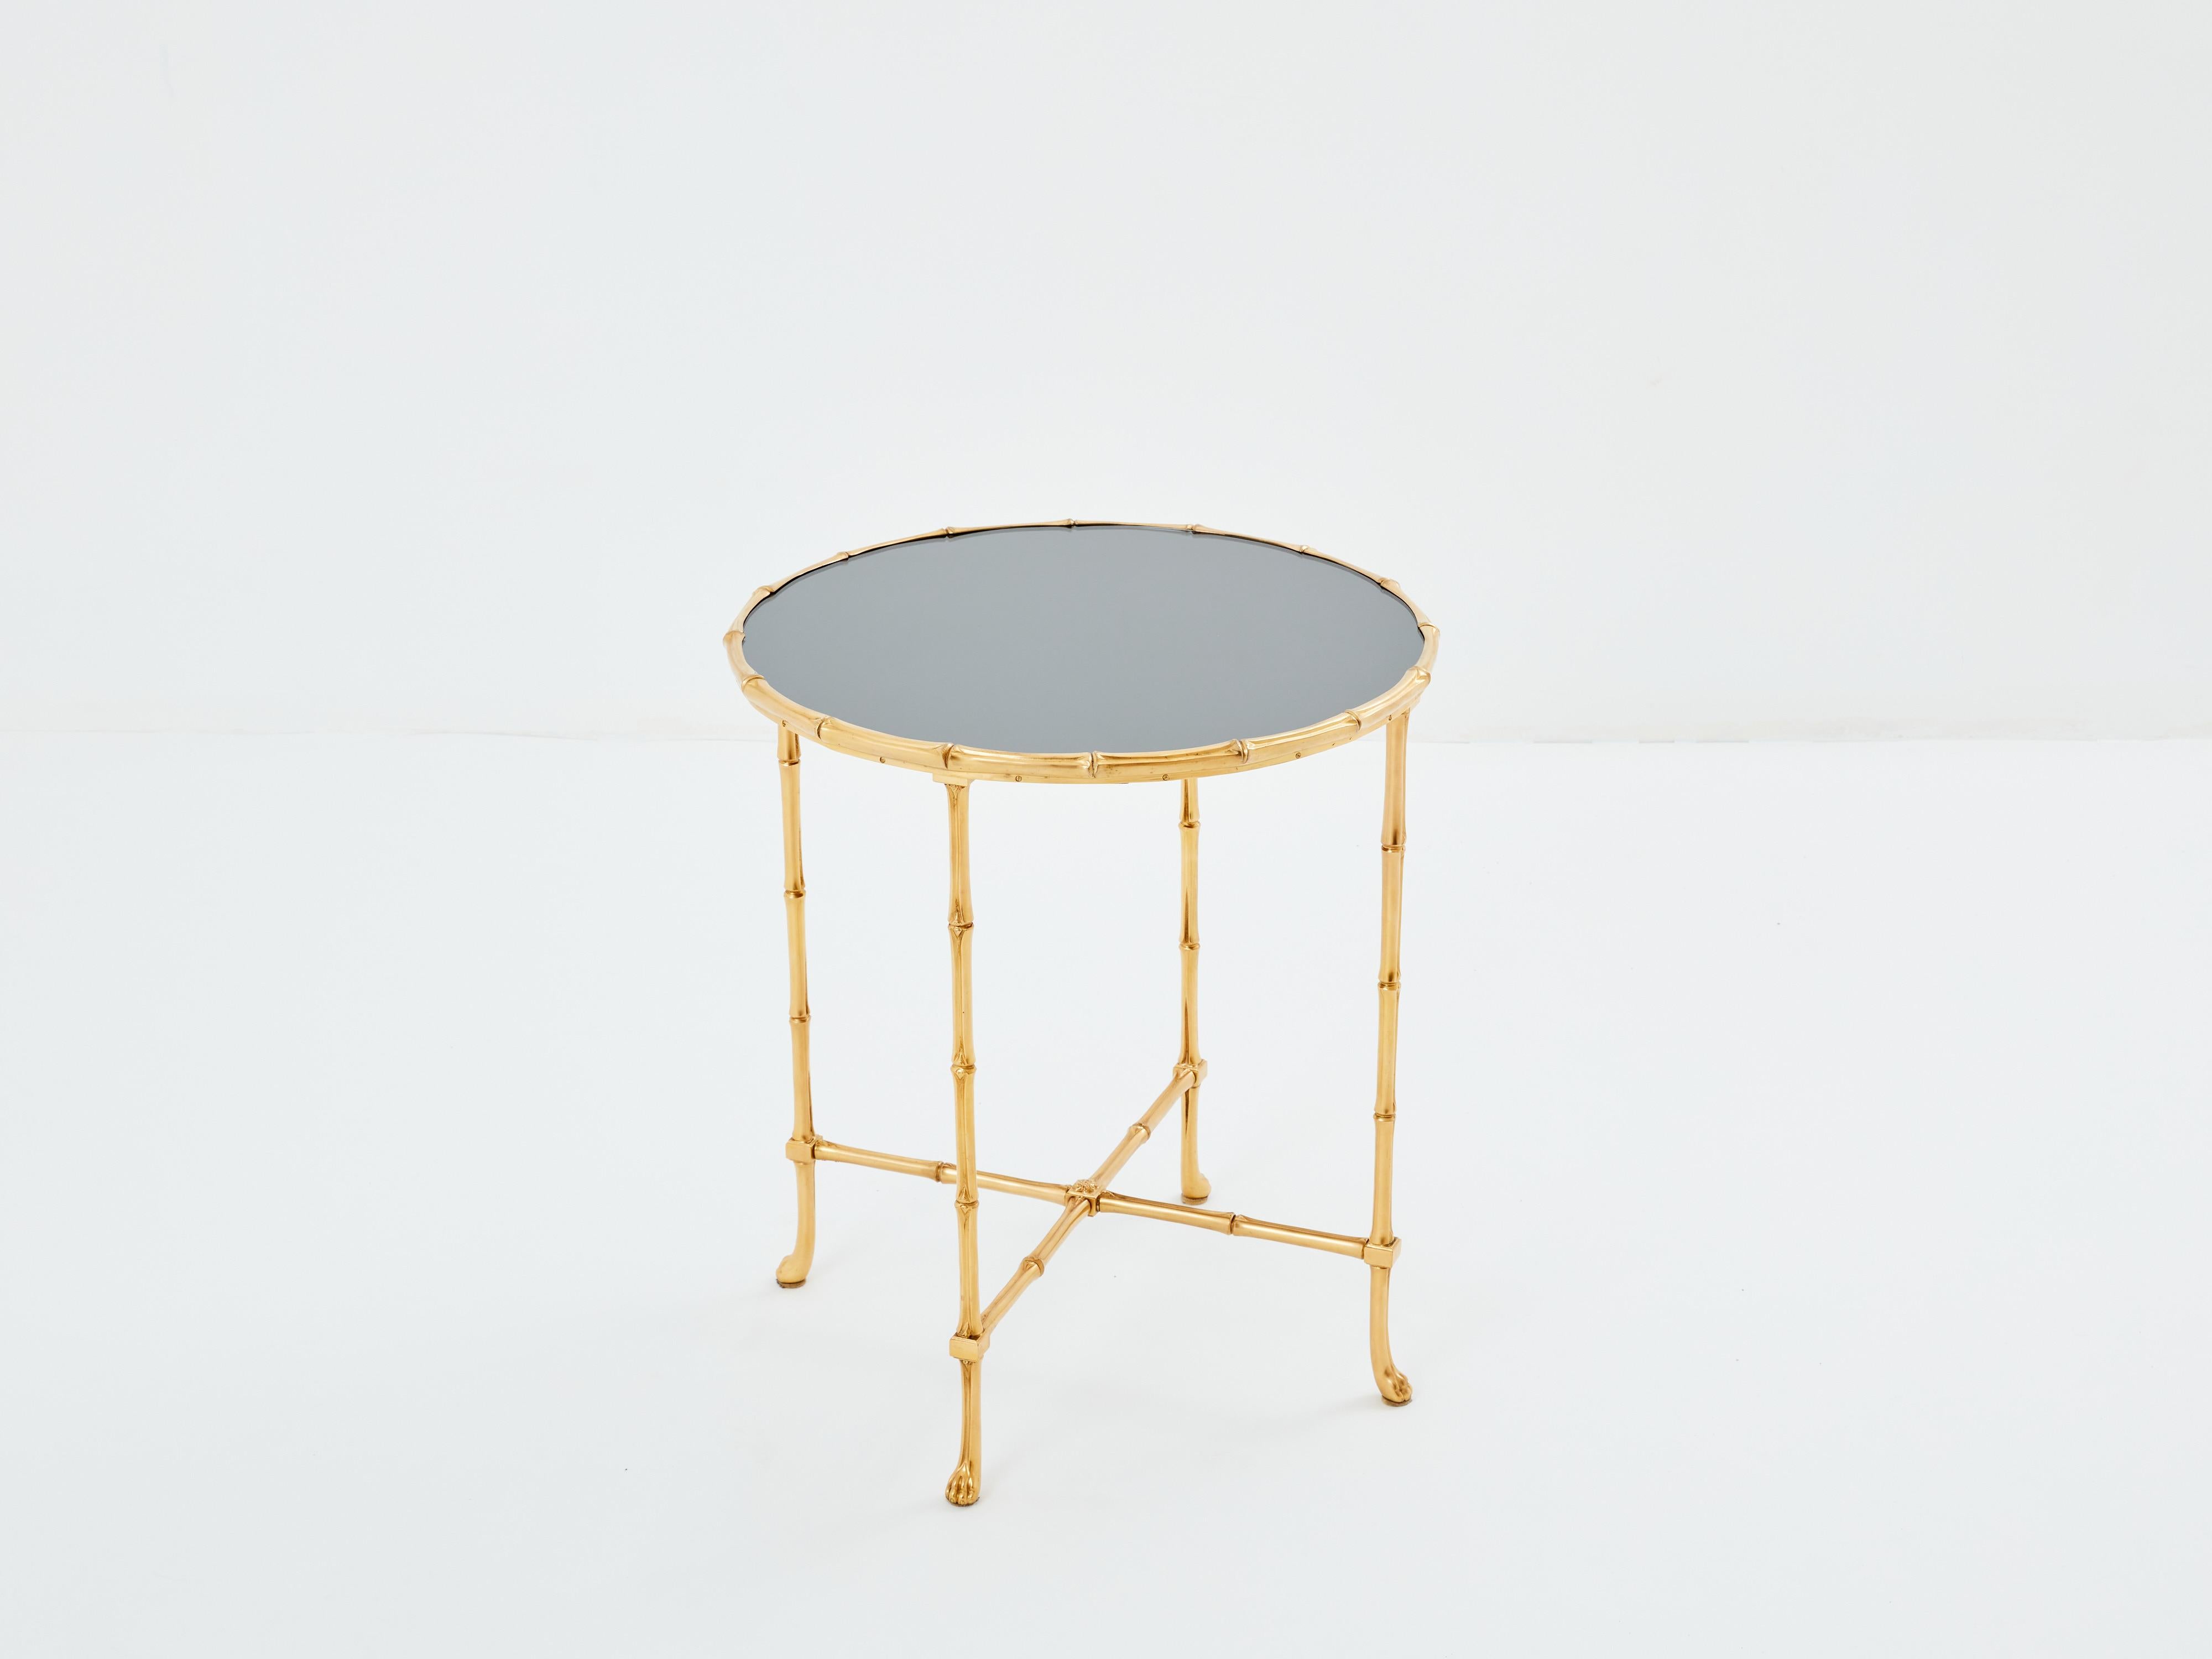 This beautiful Maison Baguès gueridon table was created with solid bamboo shaped brass and a beautiful dark grey mirror top in the early 1960s. The dark grey mirror top is timeless and smooth, while the brass bamboo feet and body provide an